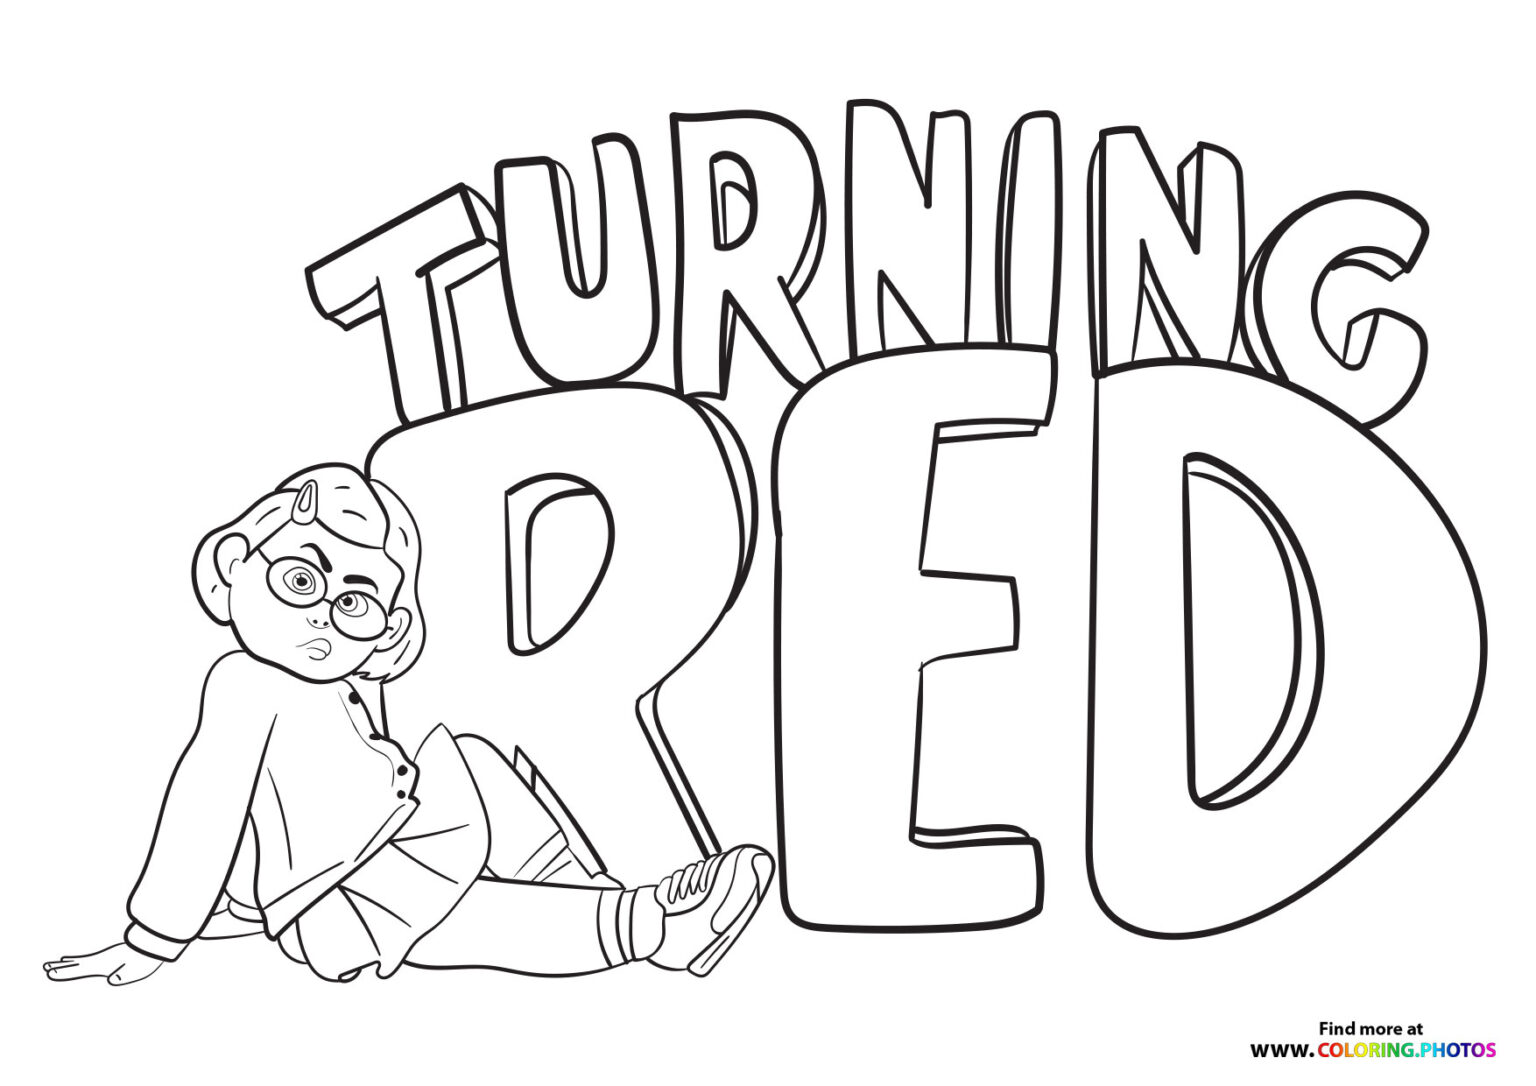 Turning Red coloring pages Free printable sheets and pages. Find more...